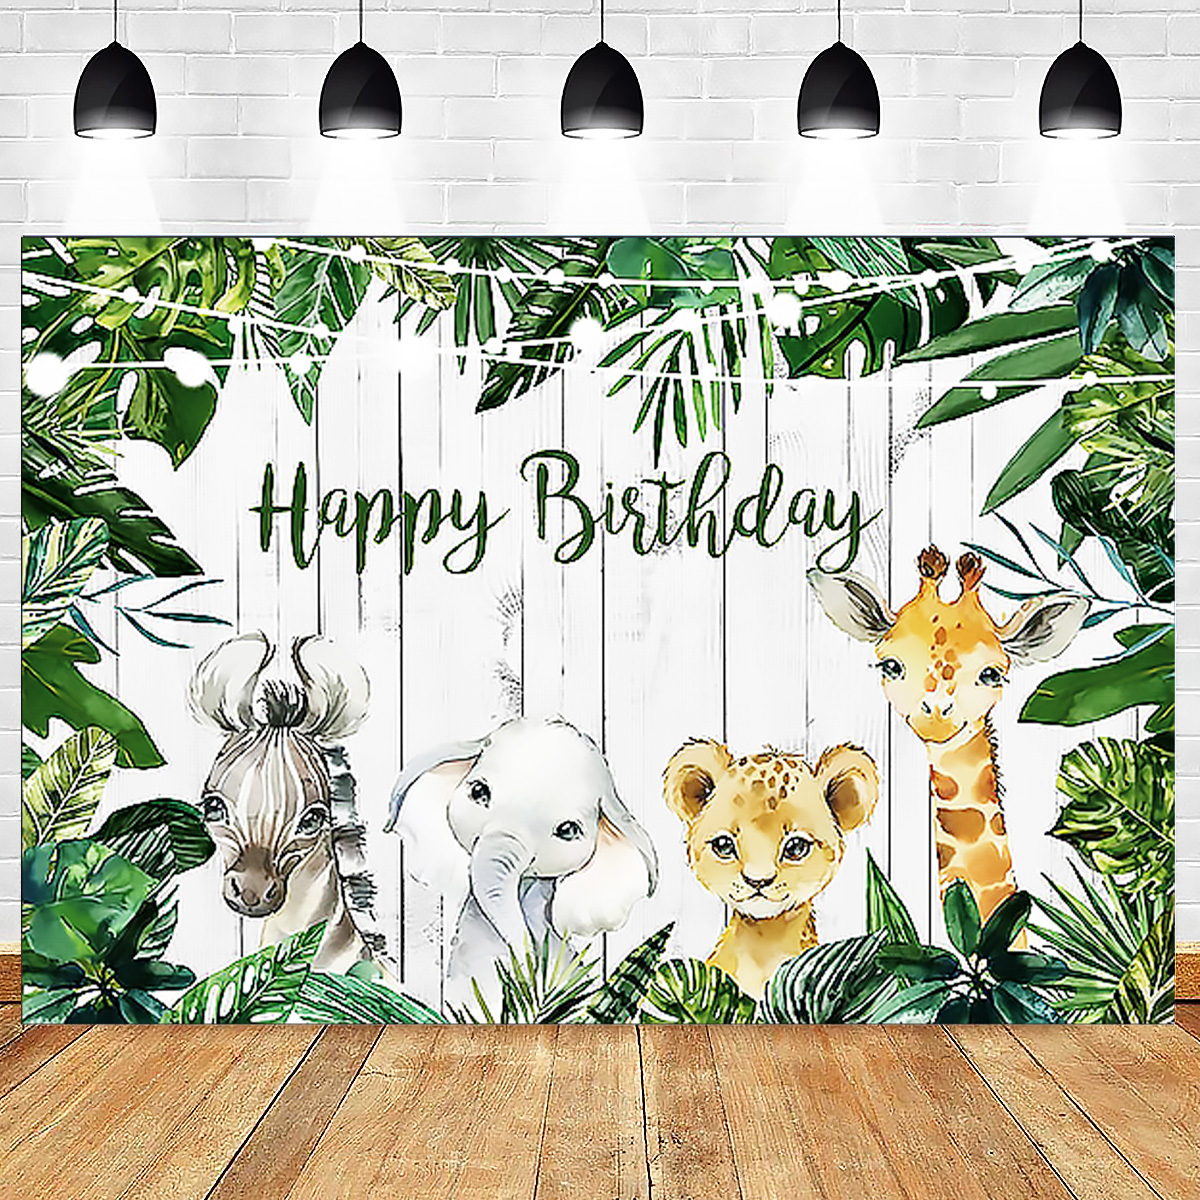 3-Size-Jungle-Green-Forest-Backdrop-Happy-Birthday-Background-Photography-Woodland-Party-Prop-1876181-13